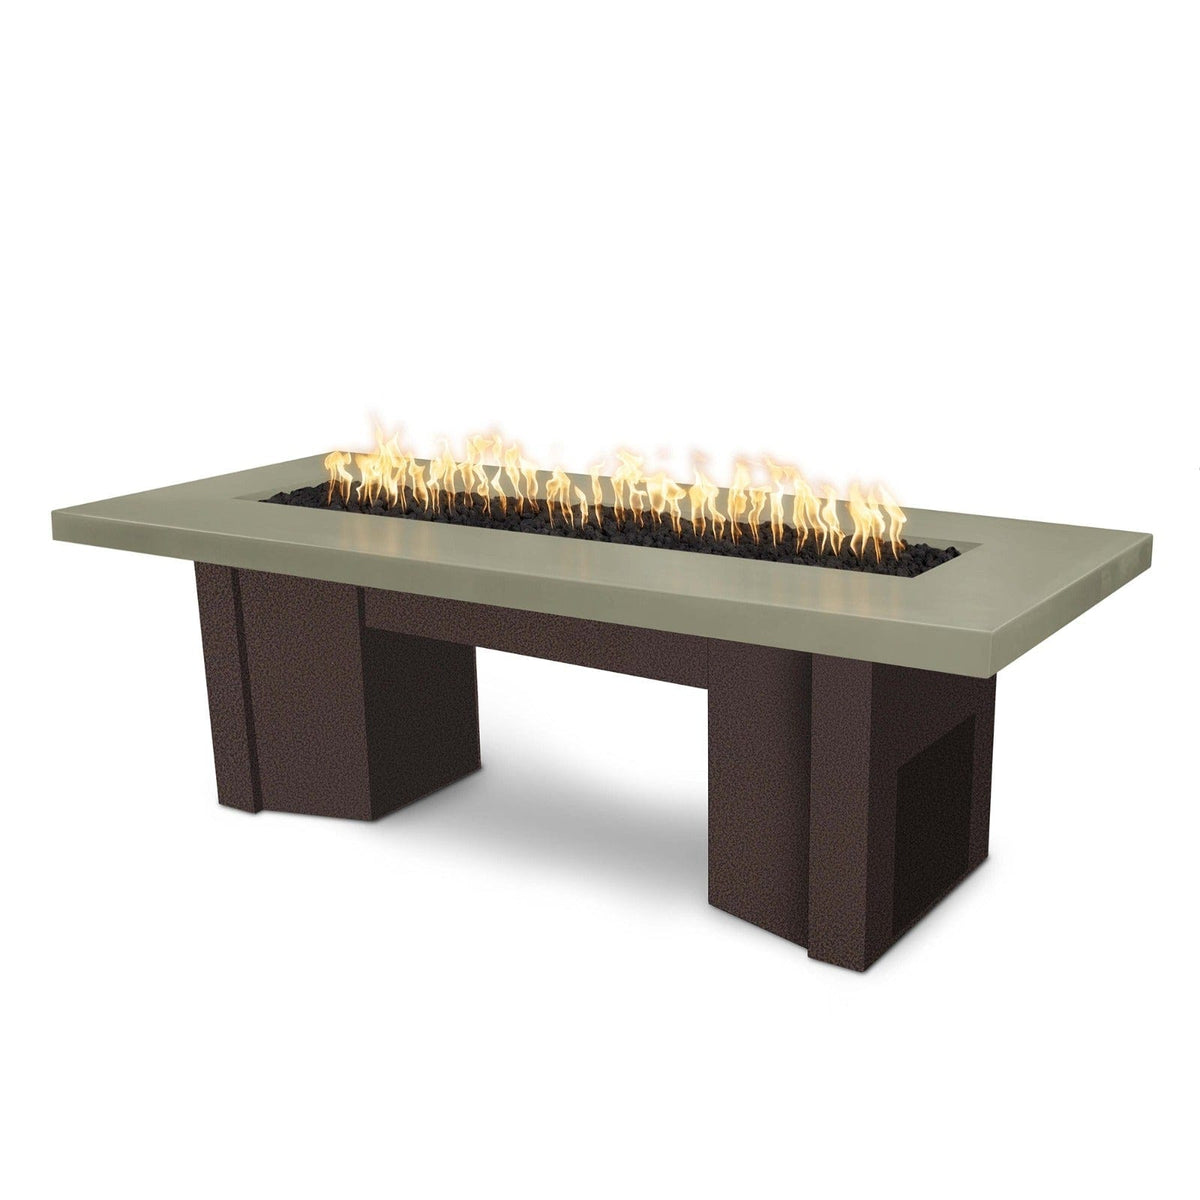 The Outdoor Plus Fire Features Ash (-ASH) / Copper Vein Powder Coated Steel (-CPV) The Outdoor Plus 60&quot; Alameda Fire Table Smooth Concrete in Liquid Propane - Flame Sense System with Push Button Spark Igniter / OPT-ALMGFRC60FSEN-LP